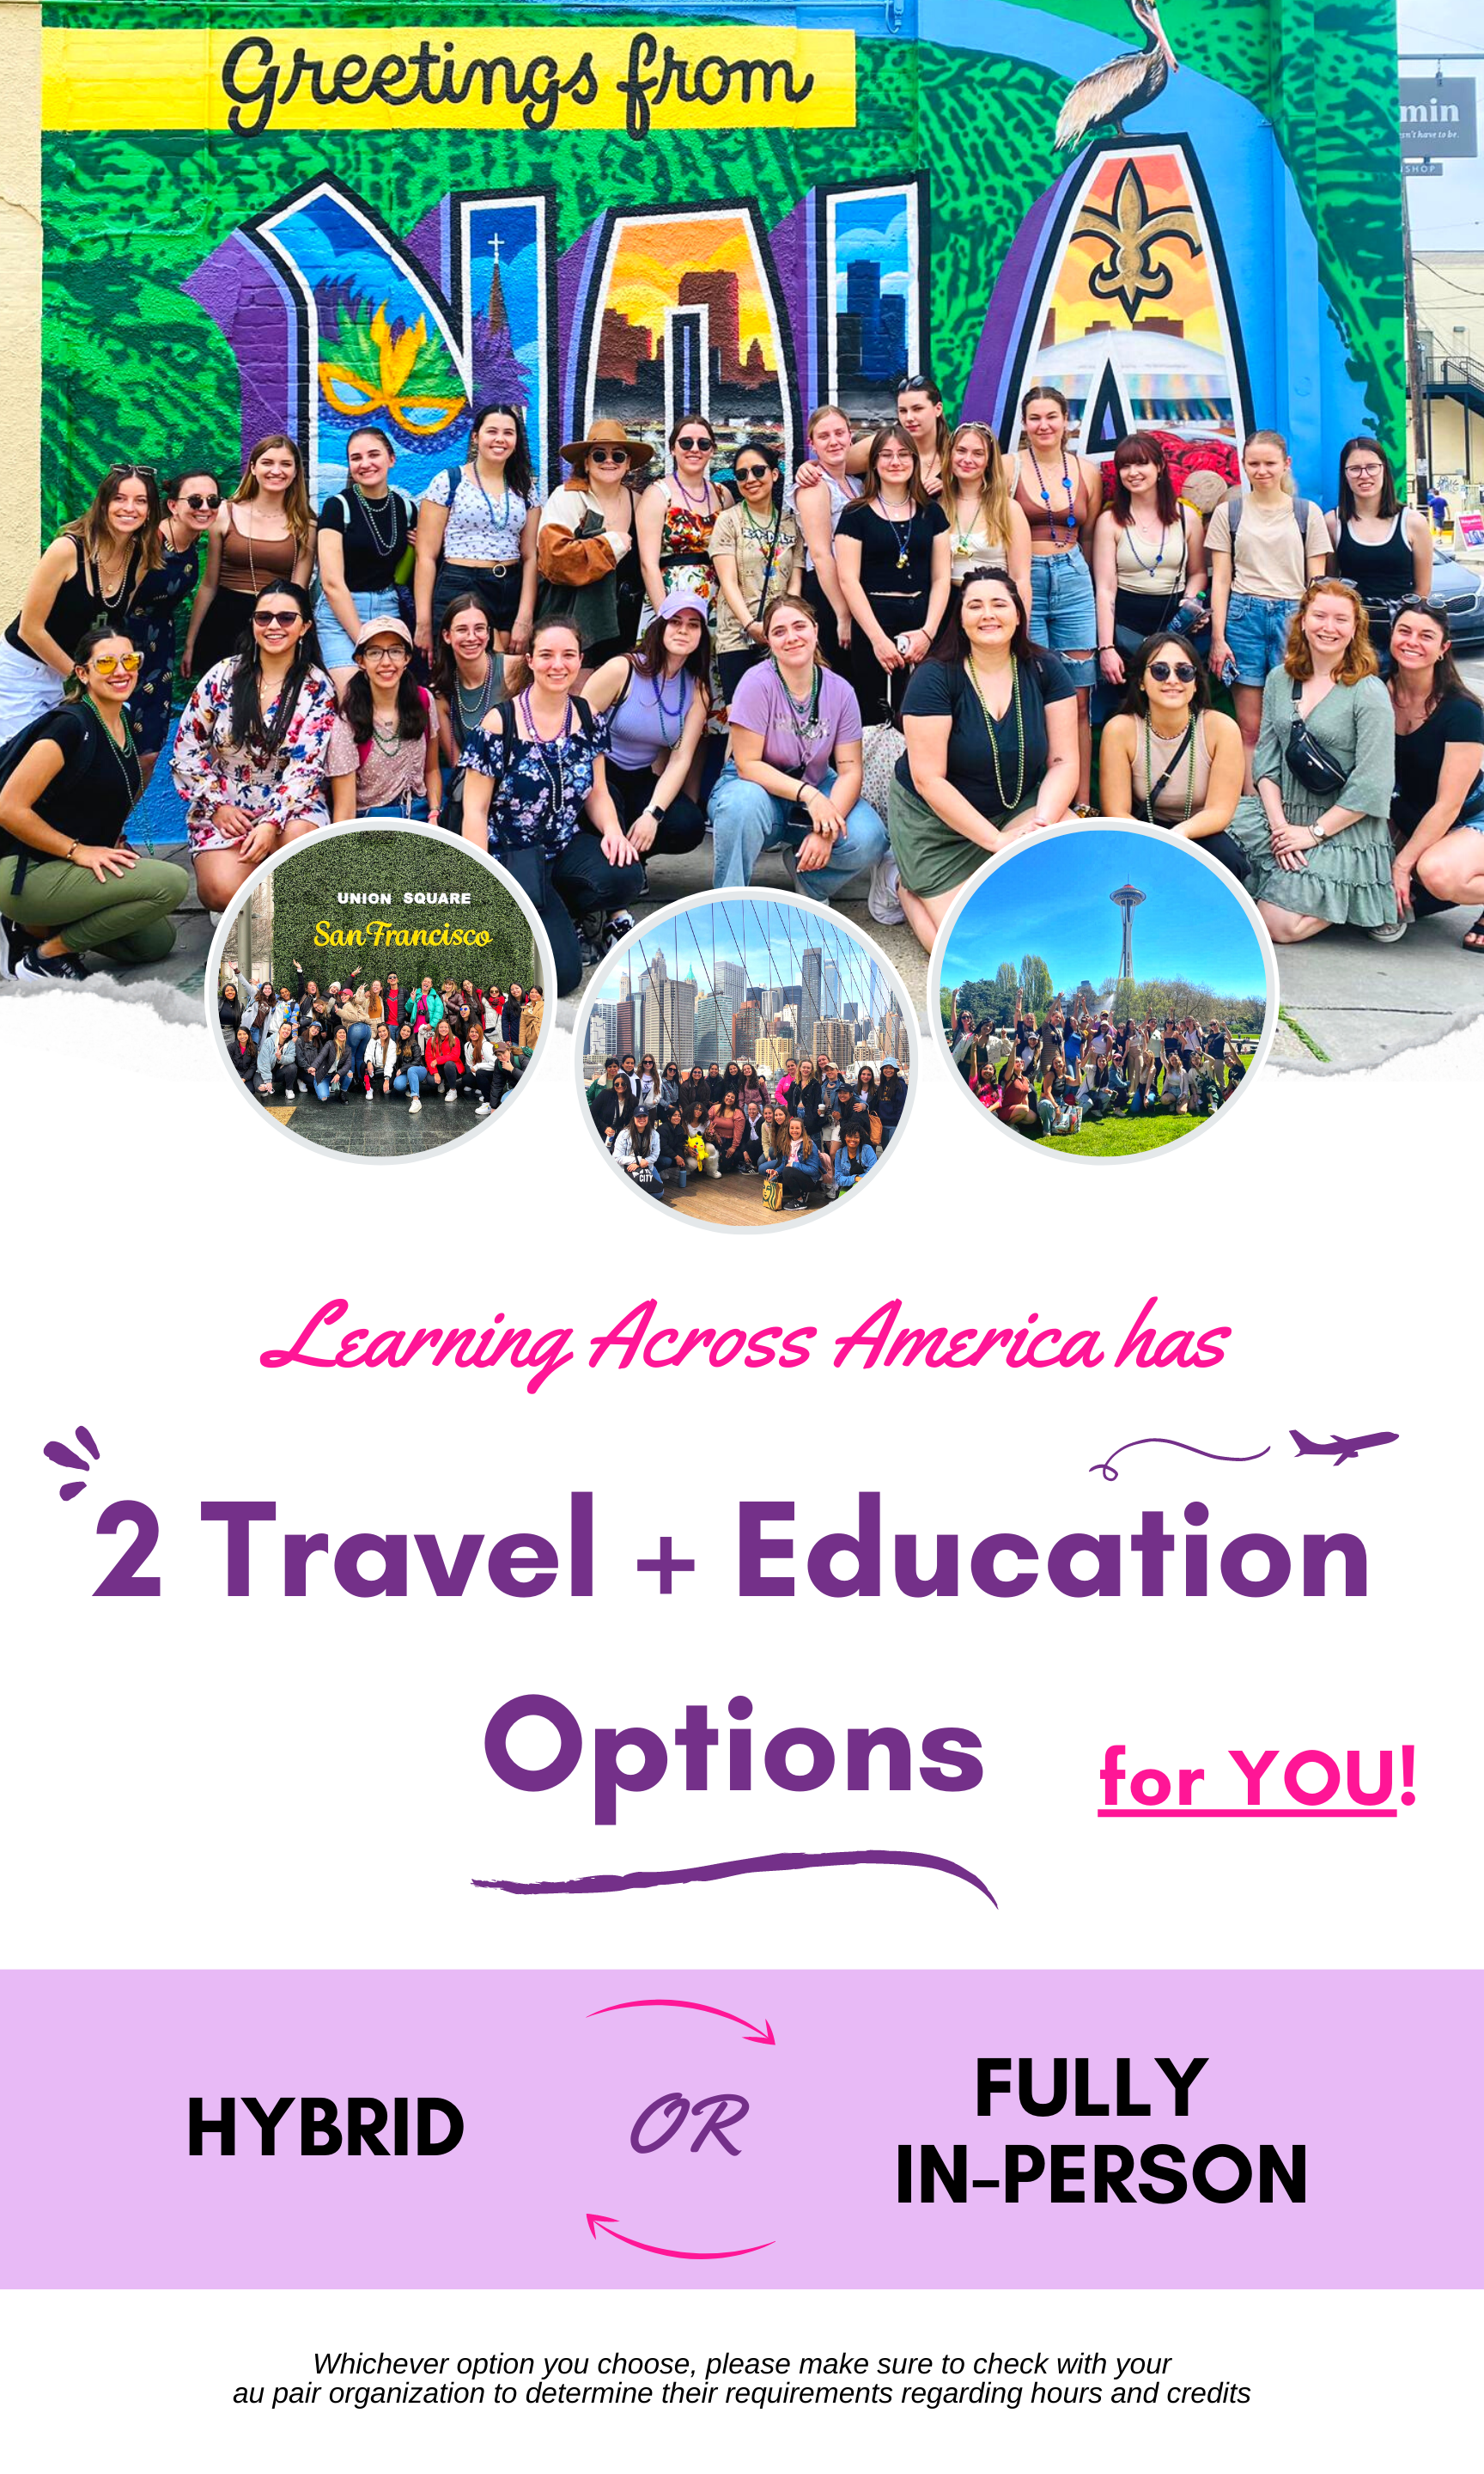 Au Pair Weekend Classes, Fast and Affordable